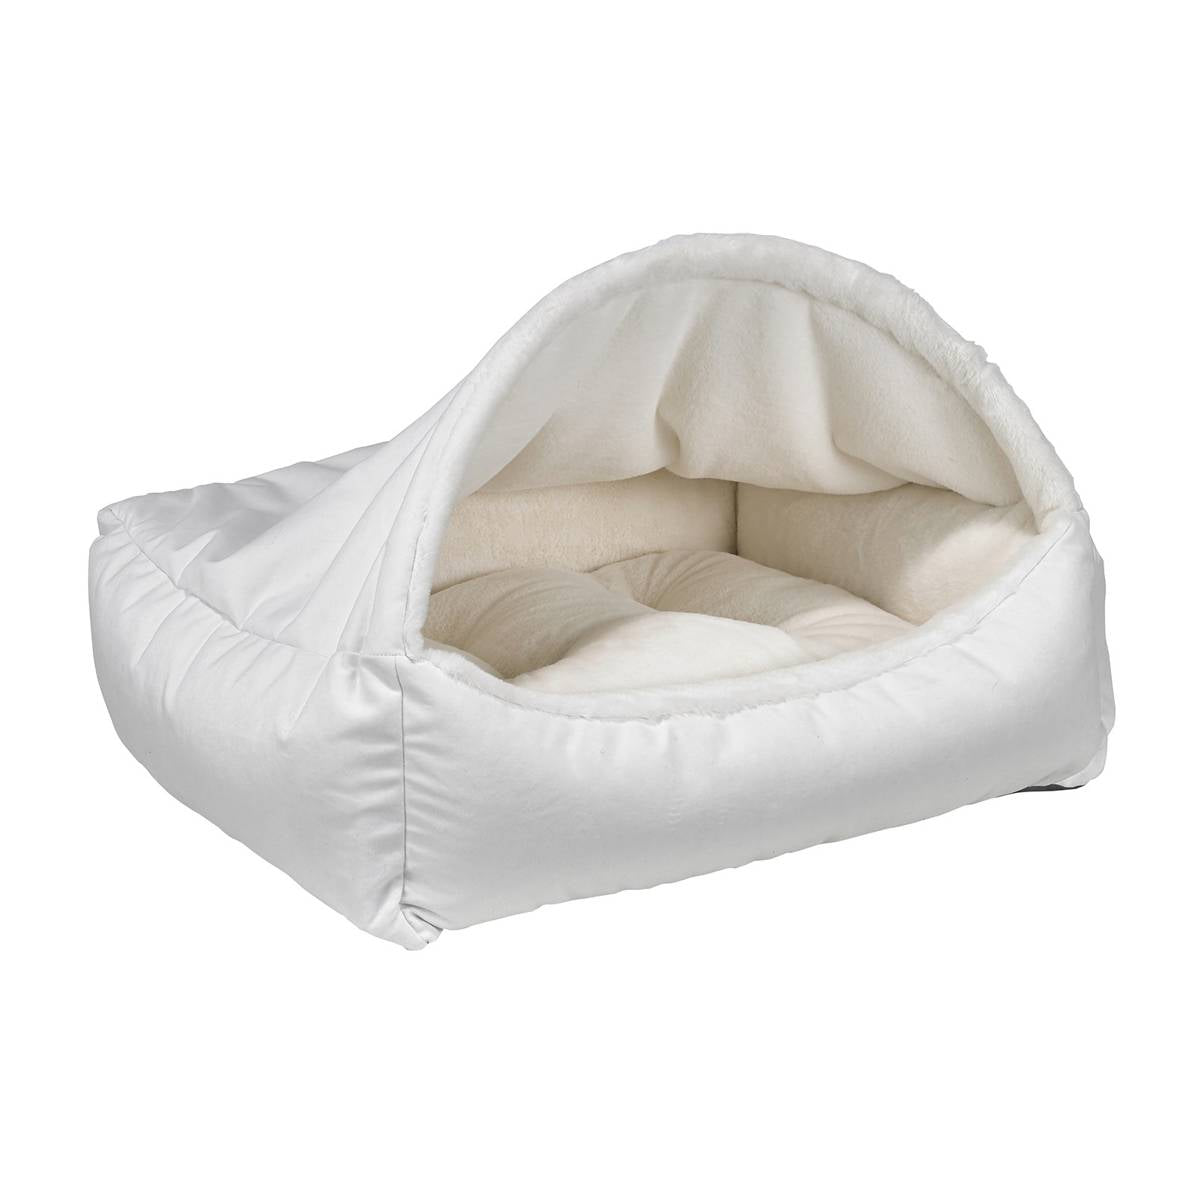 Canopy Bed in Winter White Fur | Pawlicious & Company